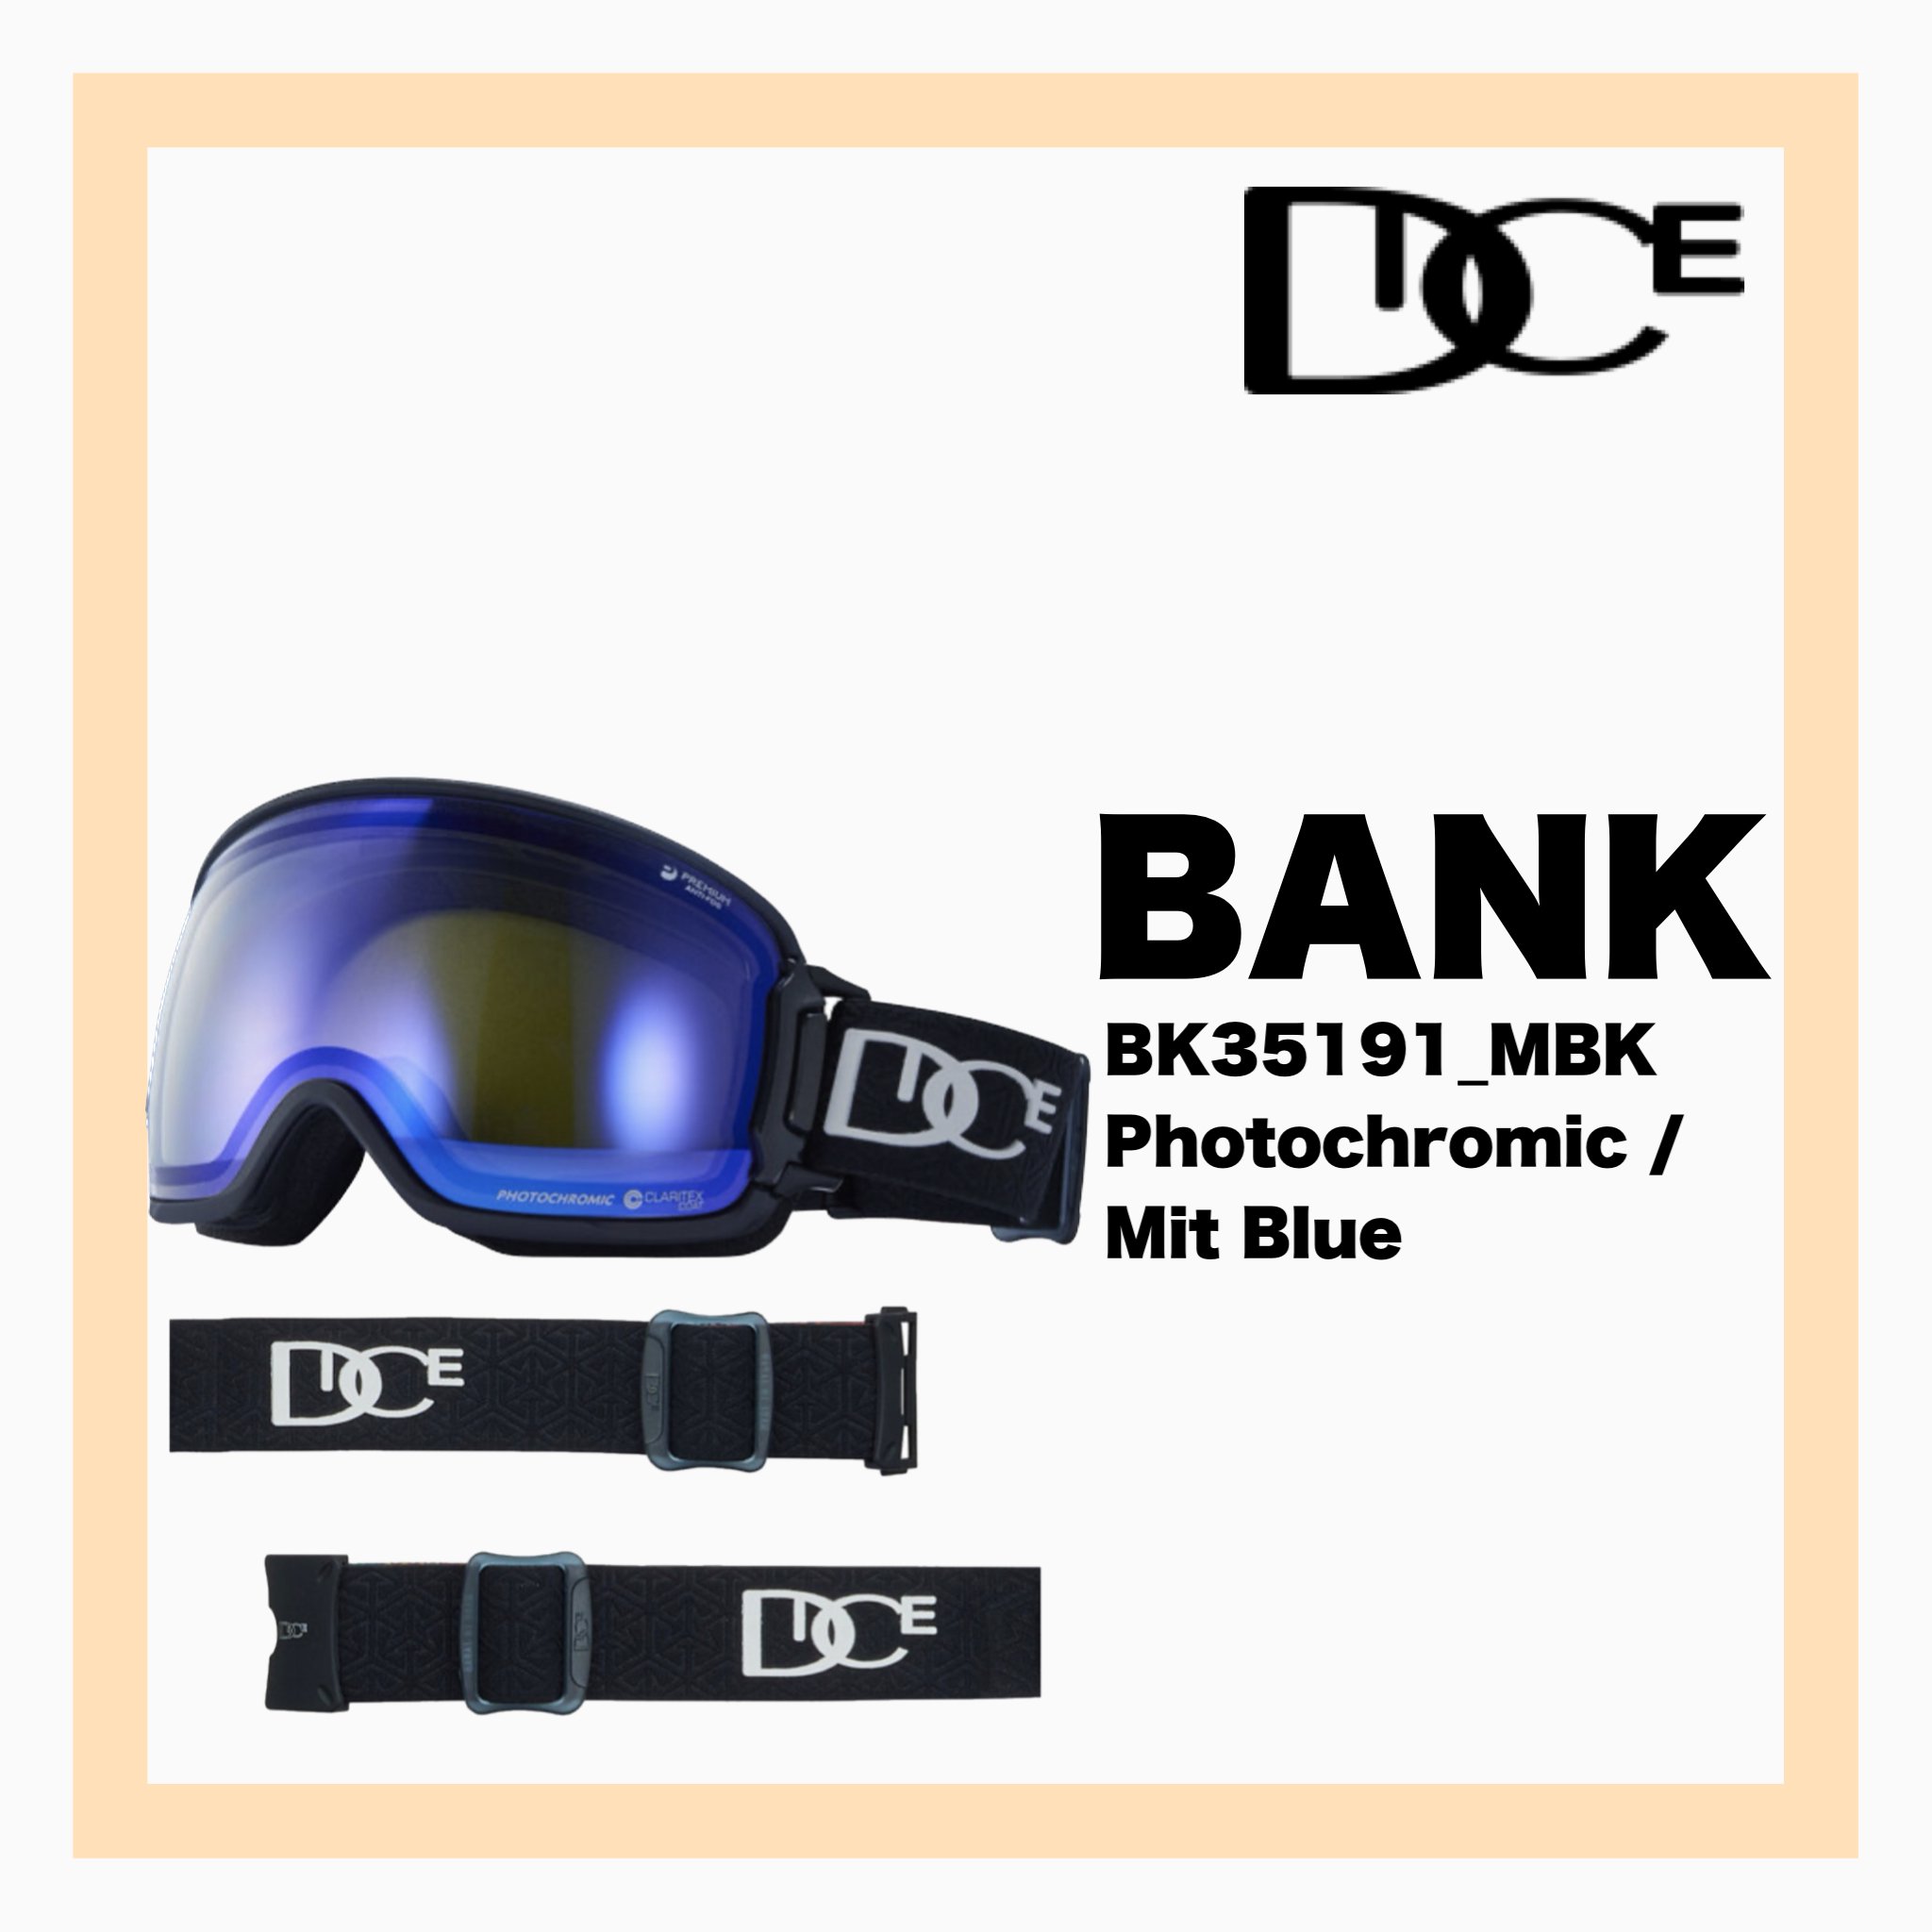 <img class='new_mark_img1' src='https://img.shop-pro.jp/img/new/icons34.gif' style='border:none;display:inline;margin:0px;padding:0px;width:auto;' />DICE BANK MBK  Photochromic / Mit Blue